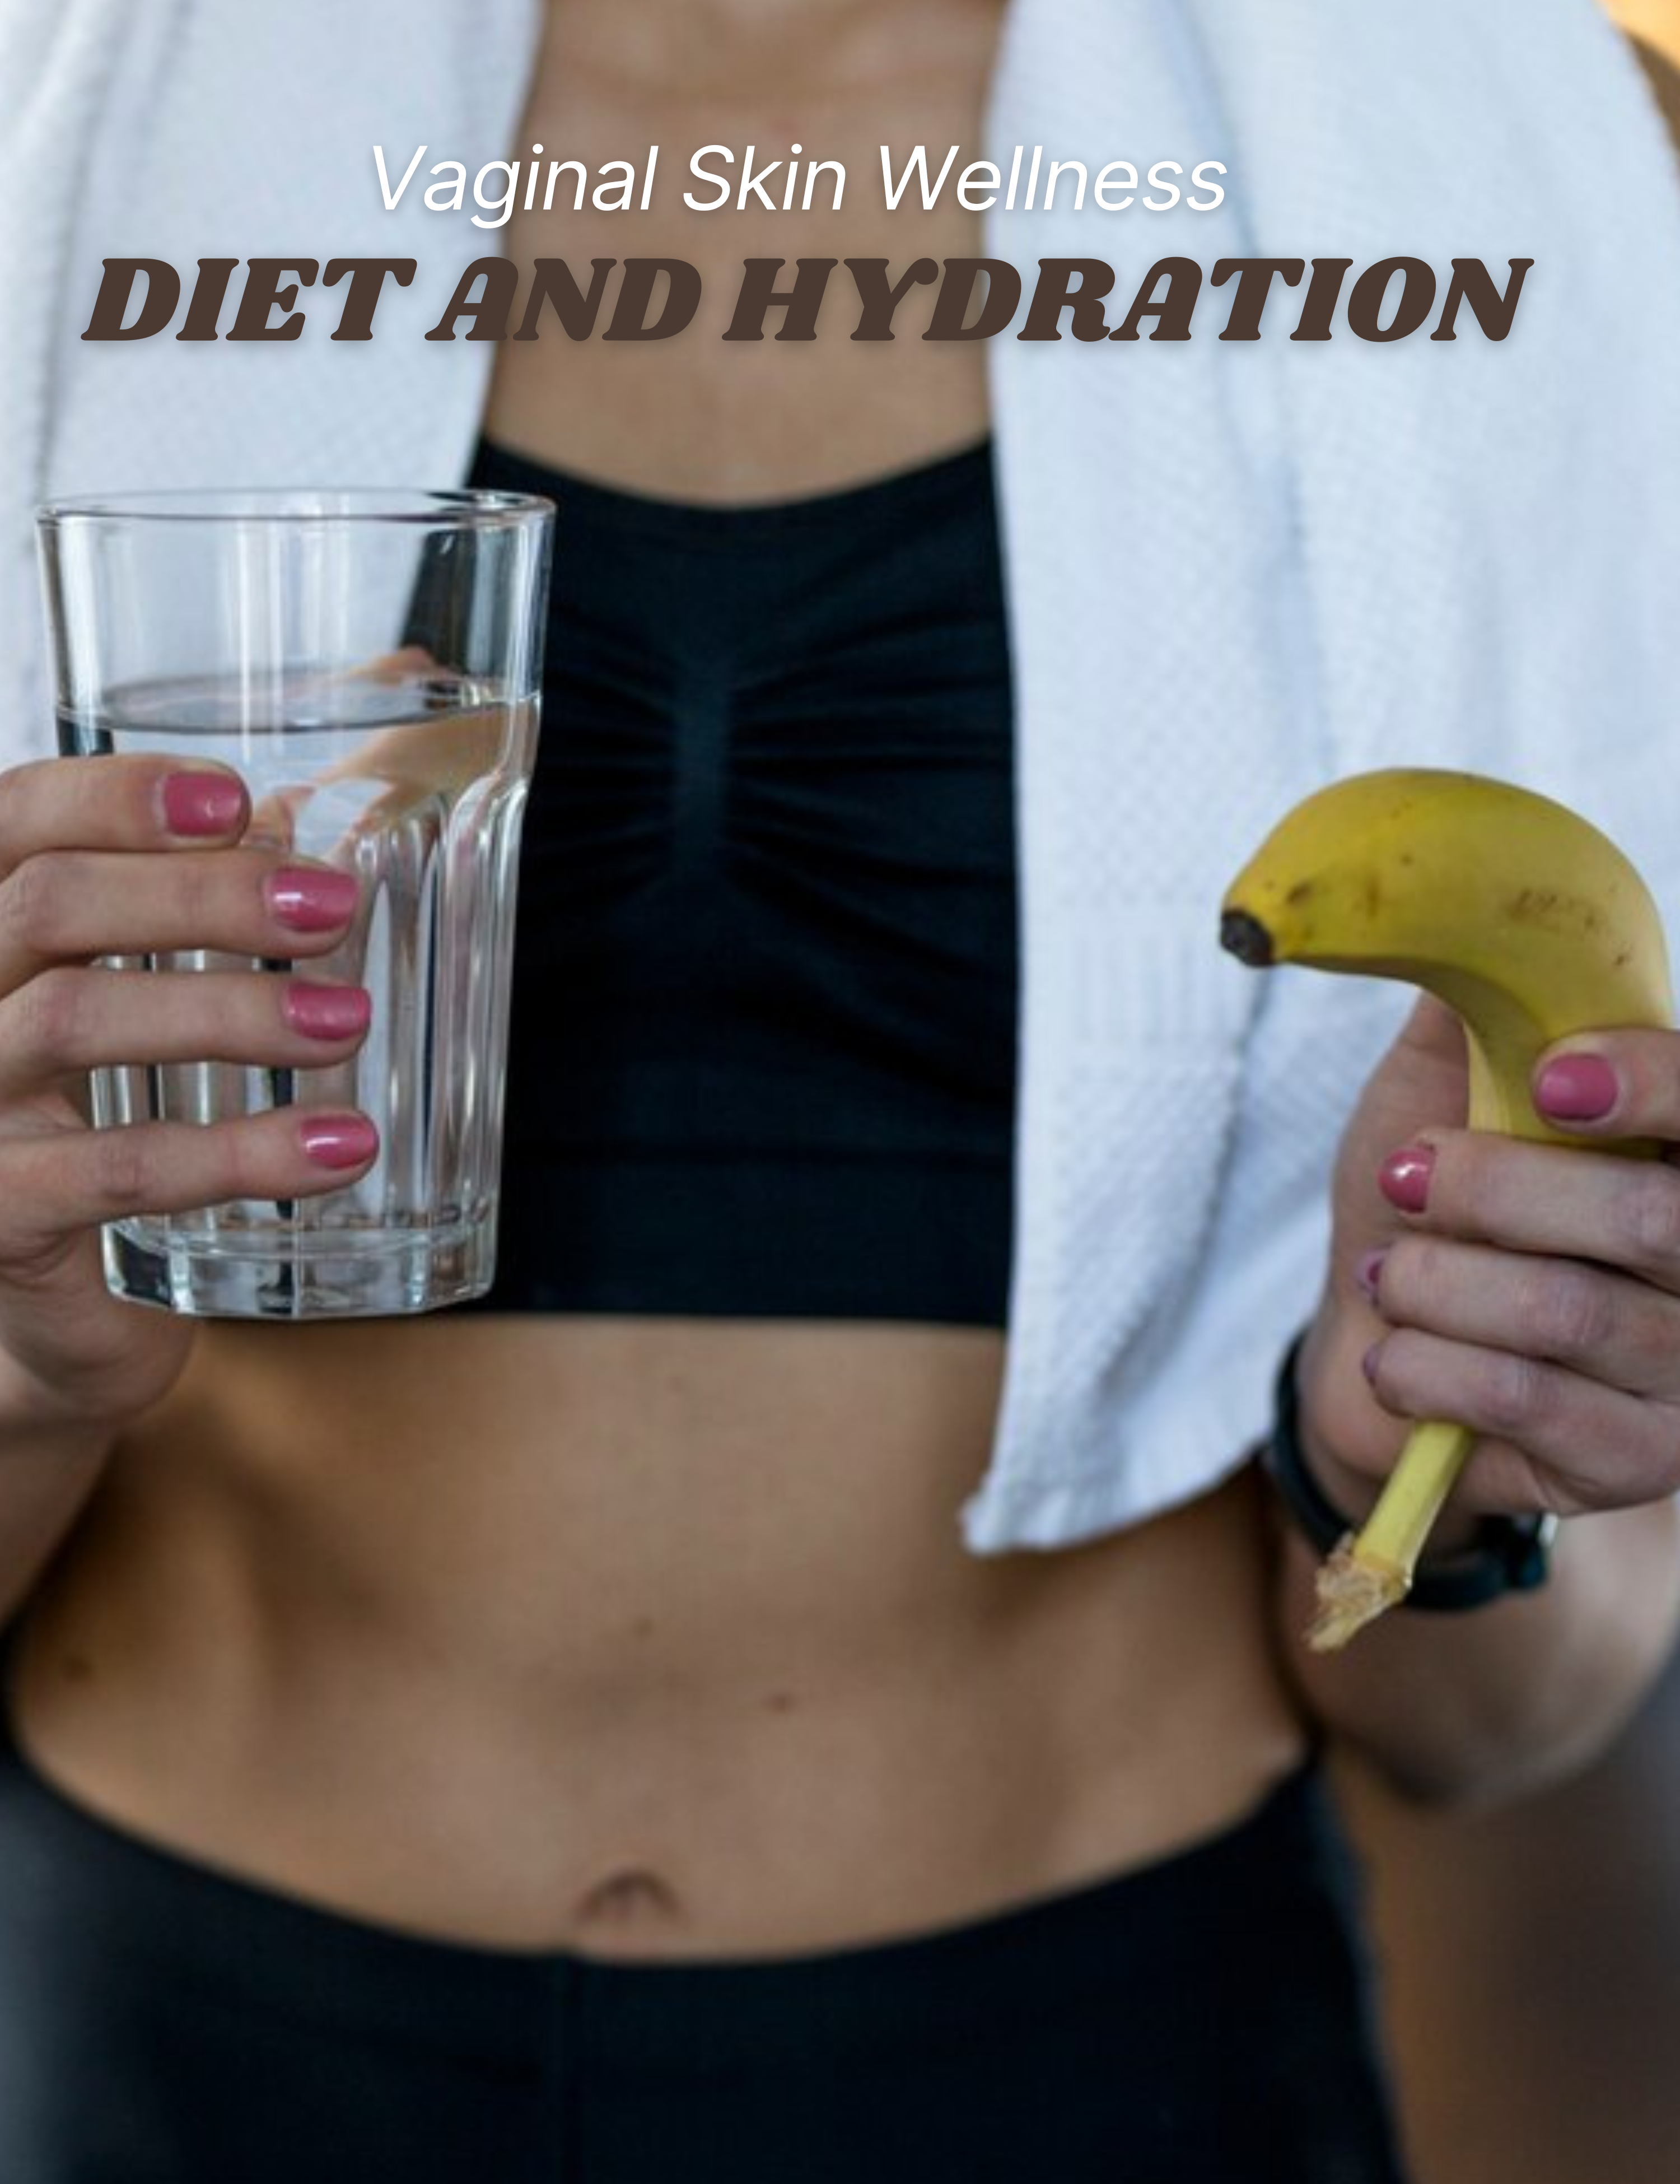 The Role of Diet and Hydration in Vaginal Skin Wellness: Nutritional Tips for Healthy Skin